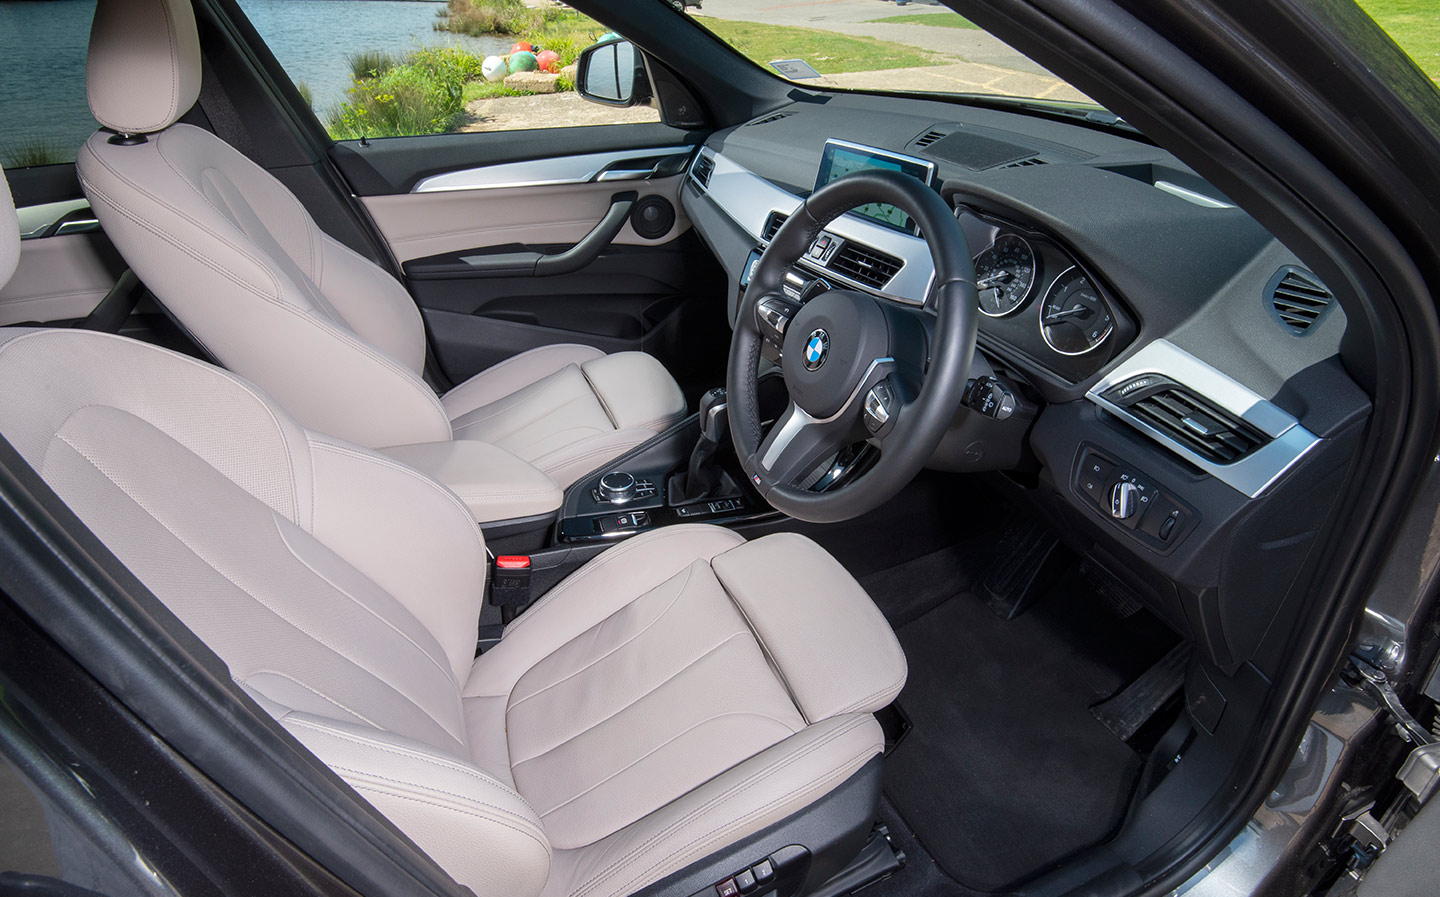 2018 BMW X1 Buying Guide interior